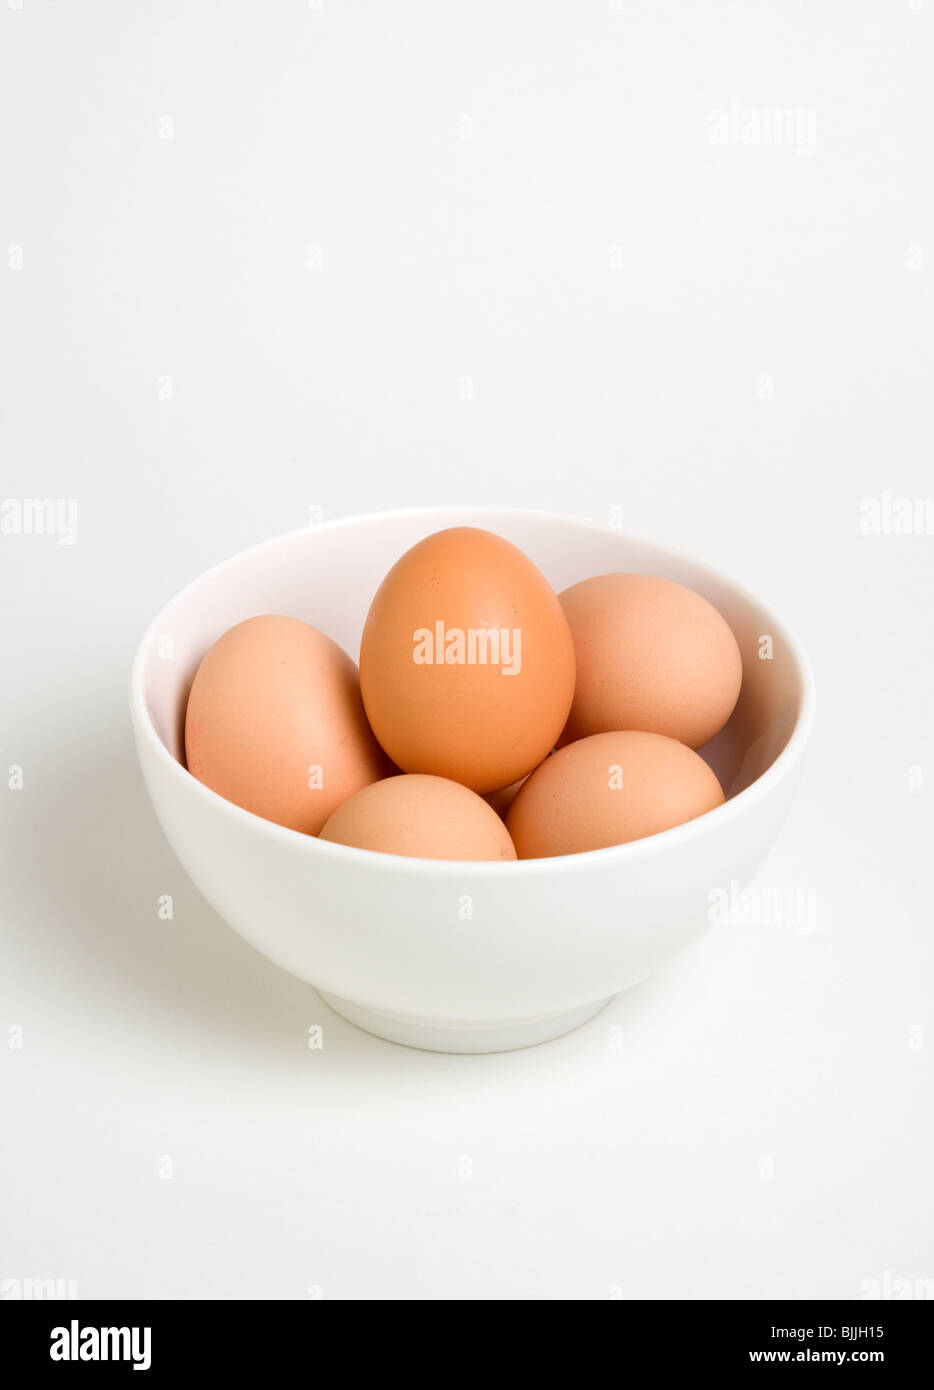 Food, Uncooked, Eggs, Free range eggs in a bowl on a white background. Stock Photo